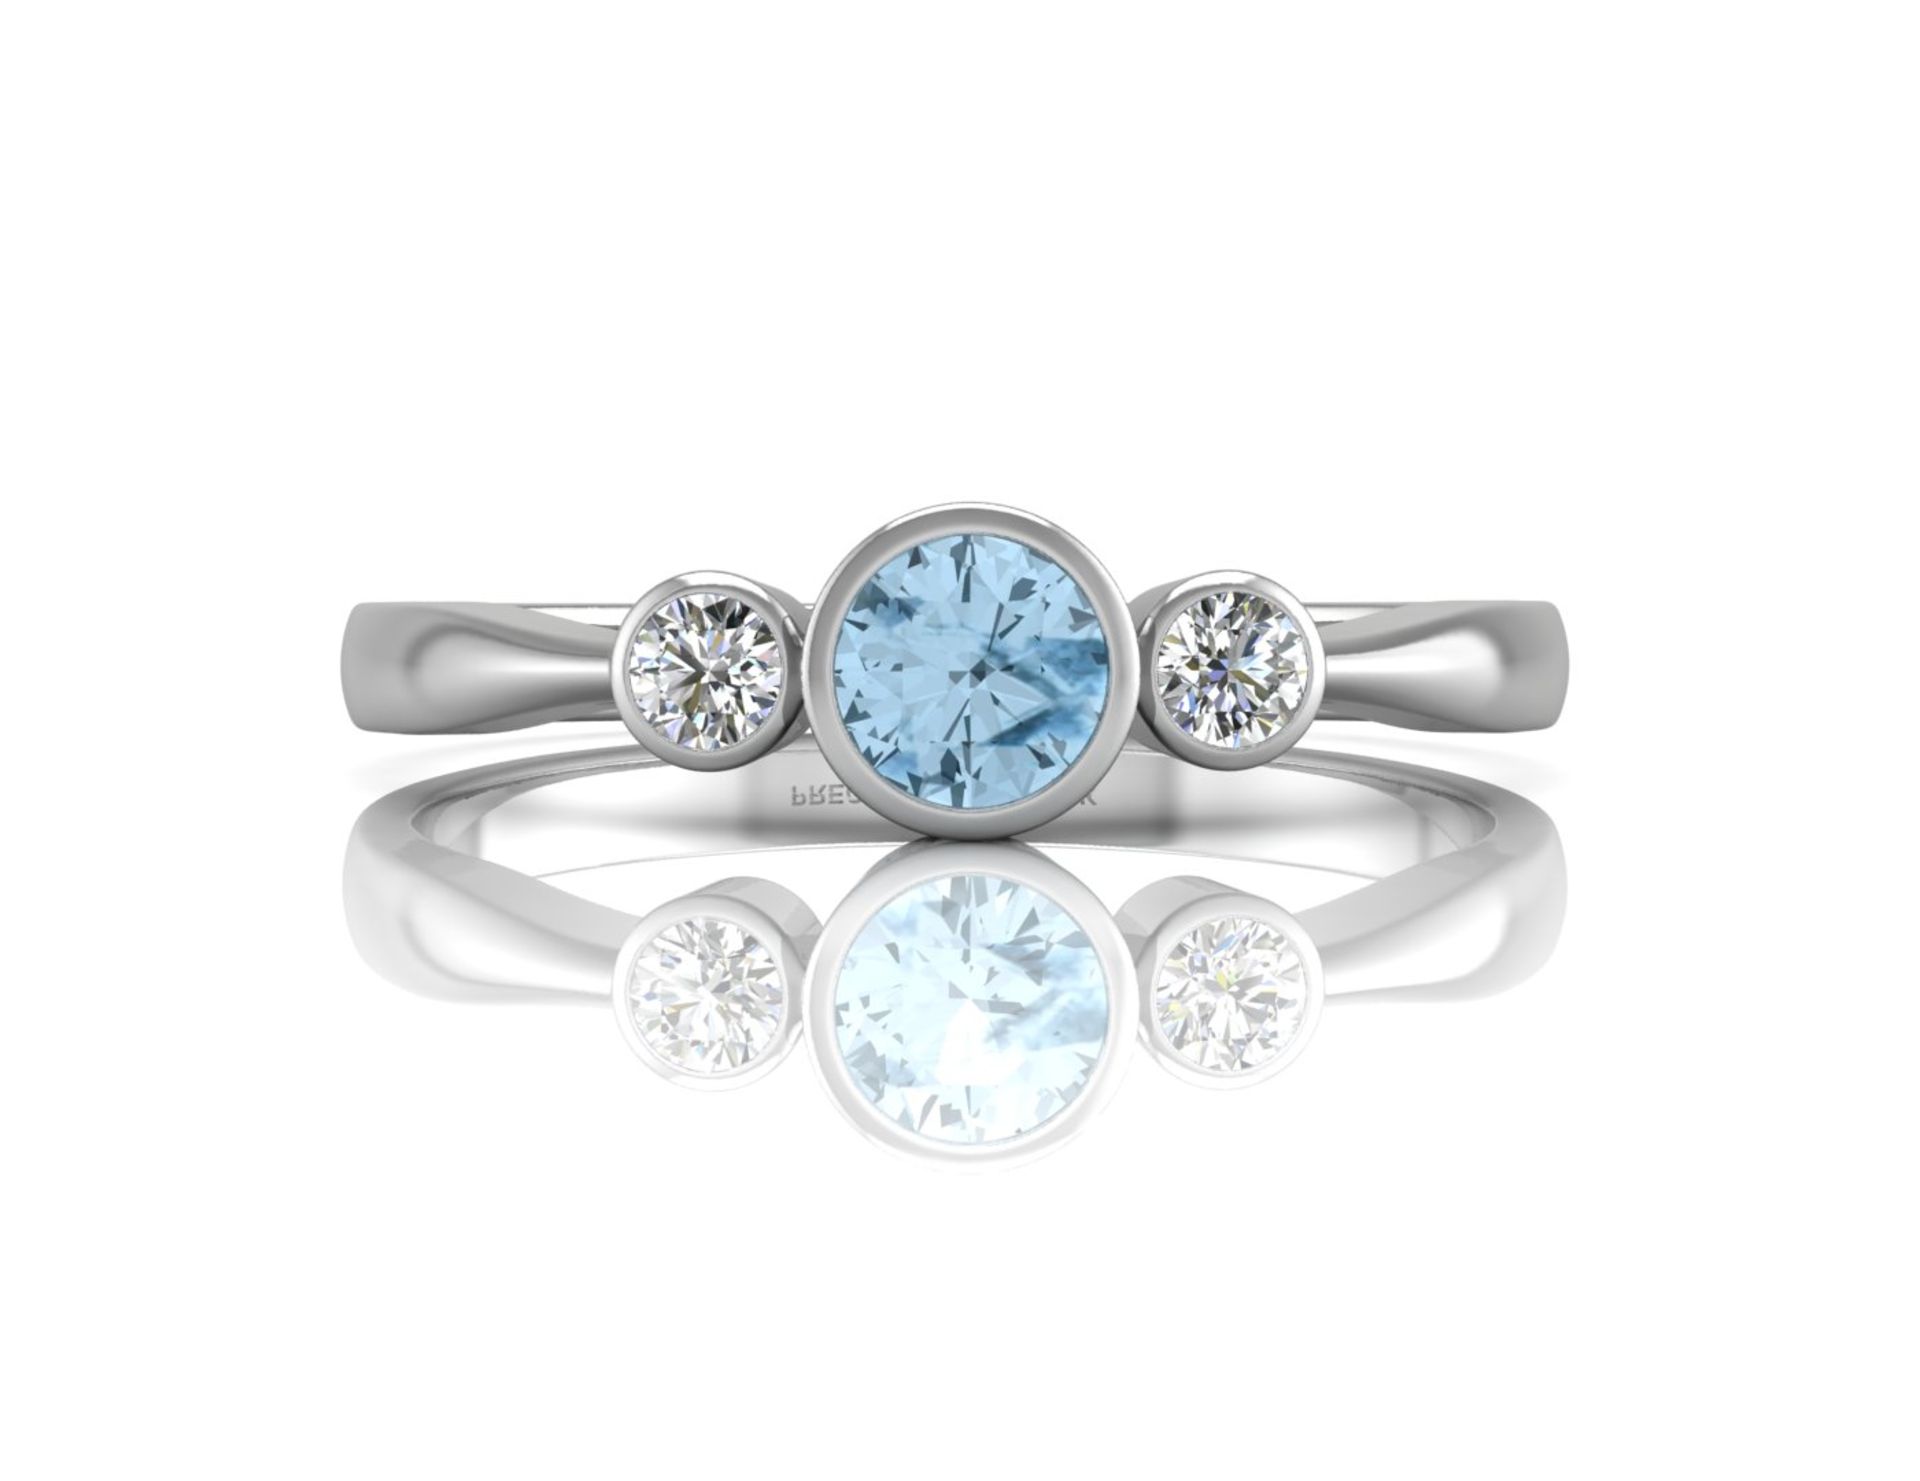 9ct White Gold Three Stone Diamond And Blue Topaz Ring (BT0.35) 0.10 Carats - Valued By AGI £2,205. - Image 4 of 5